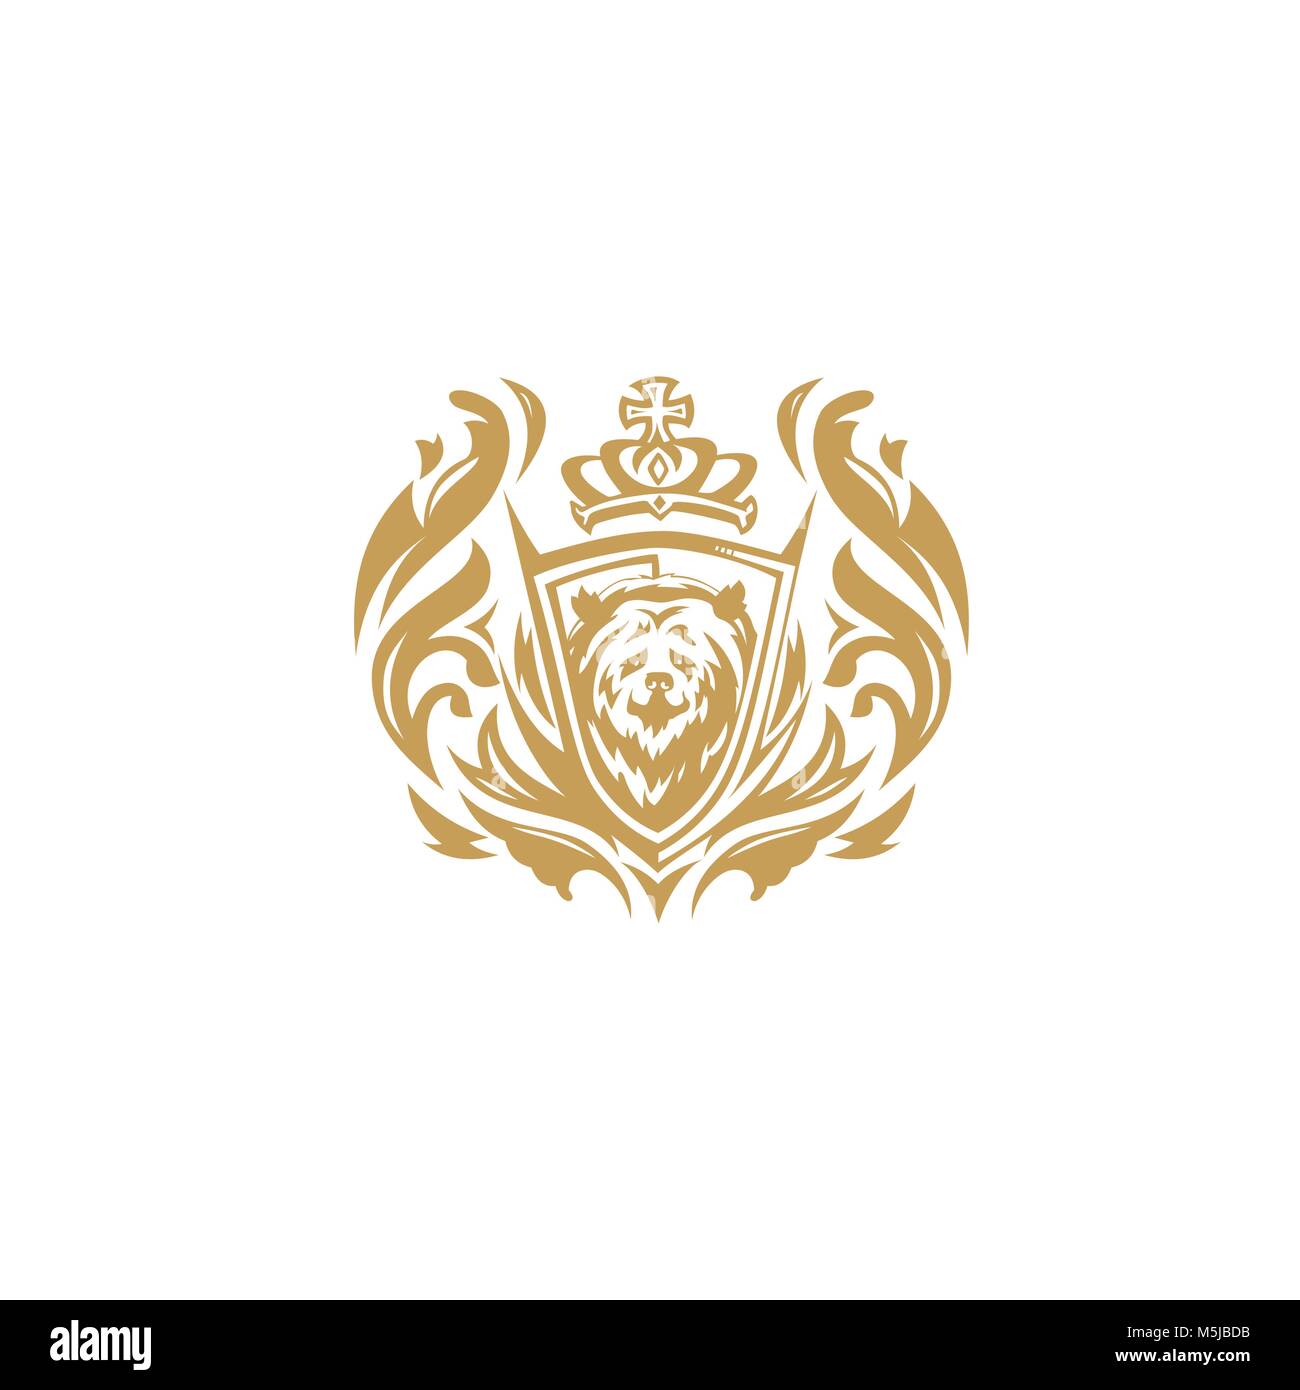 golden bear with crown on white background vector illustration design. Stock Vector